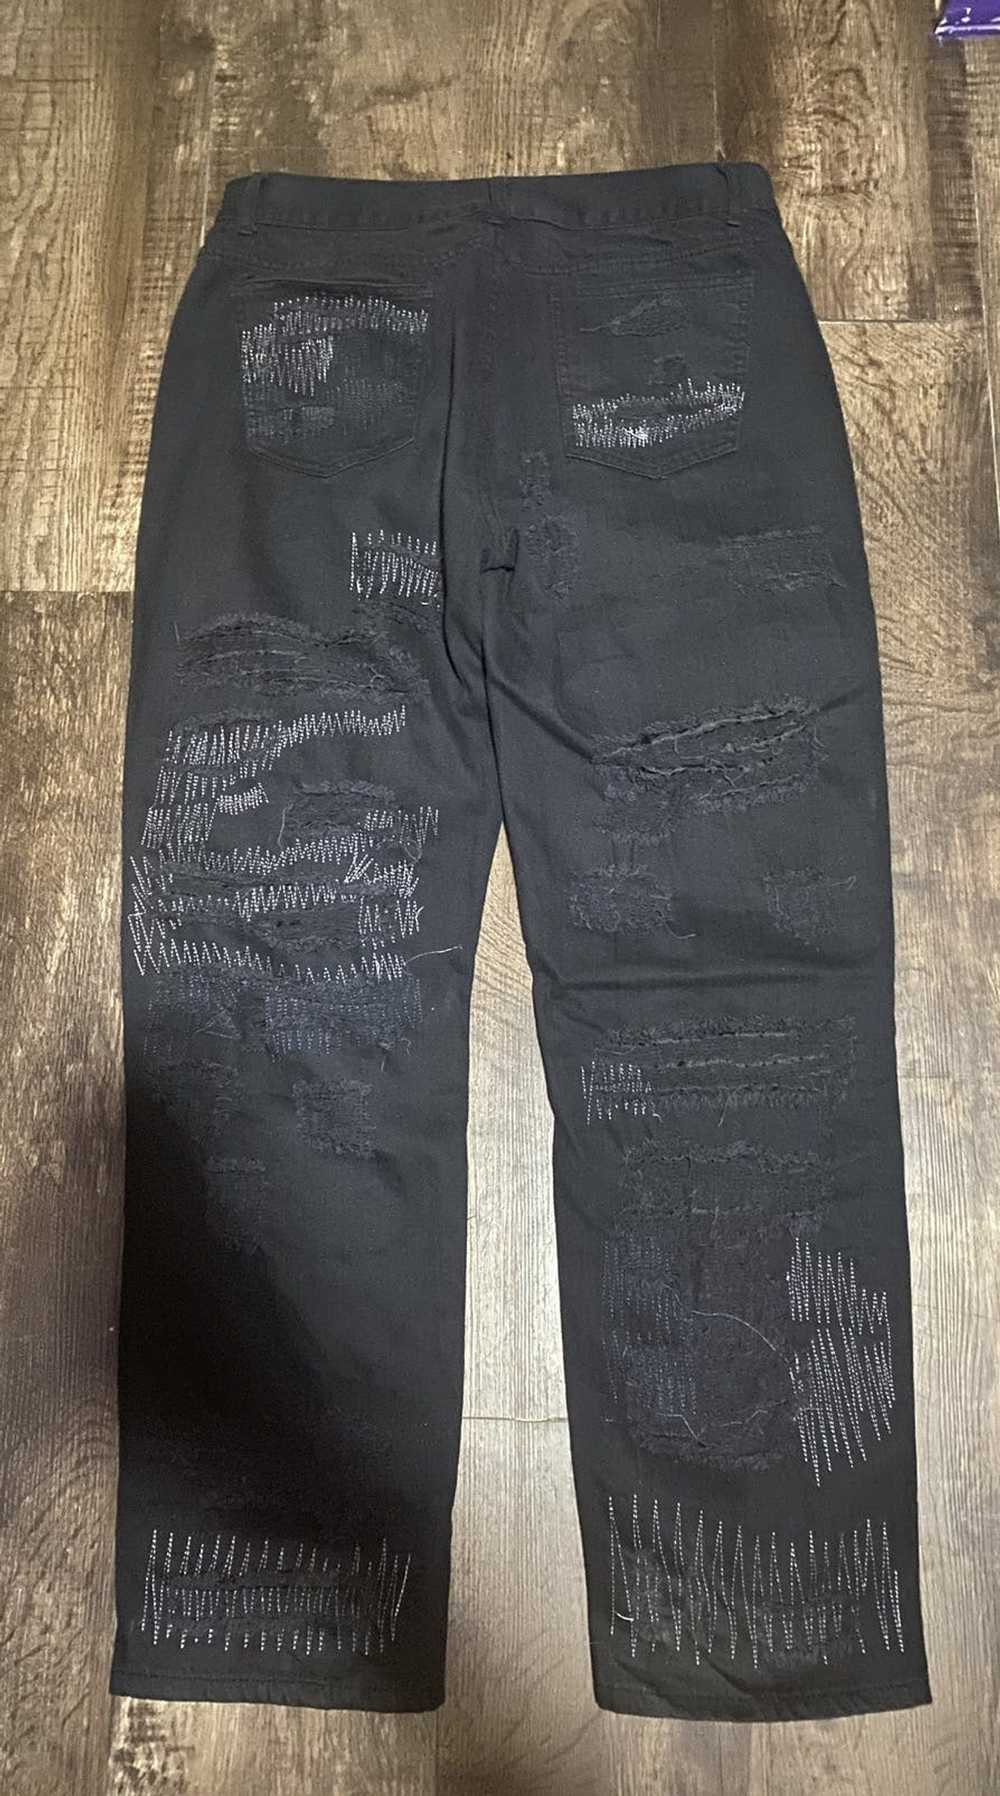 Streetwear Destroyed and repaired jeans - image 3